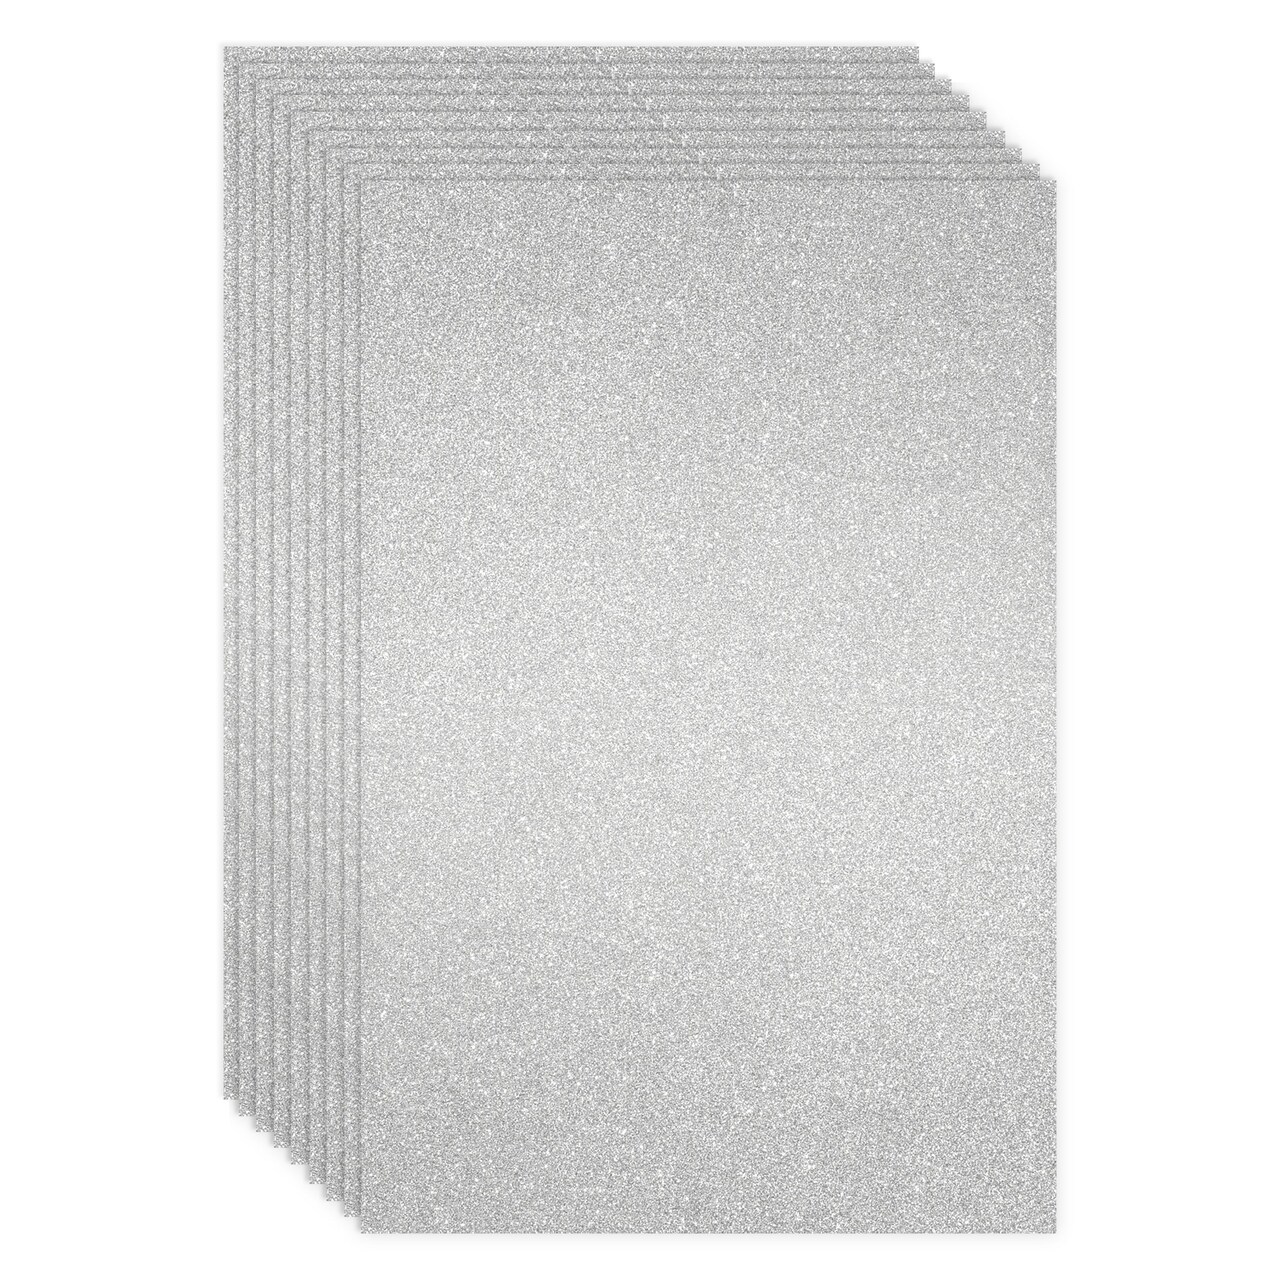 24 Sheets Silver Glitter Cardstock Paper for Scrapbooking, Arts, DIY  Sparkle Crafts, 250gsm, Double-Sided (8 x 12 In)